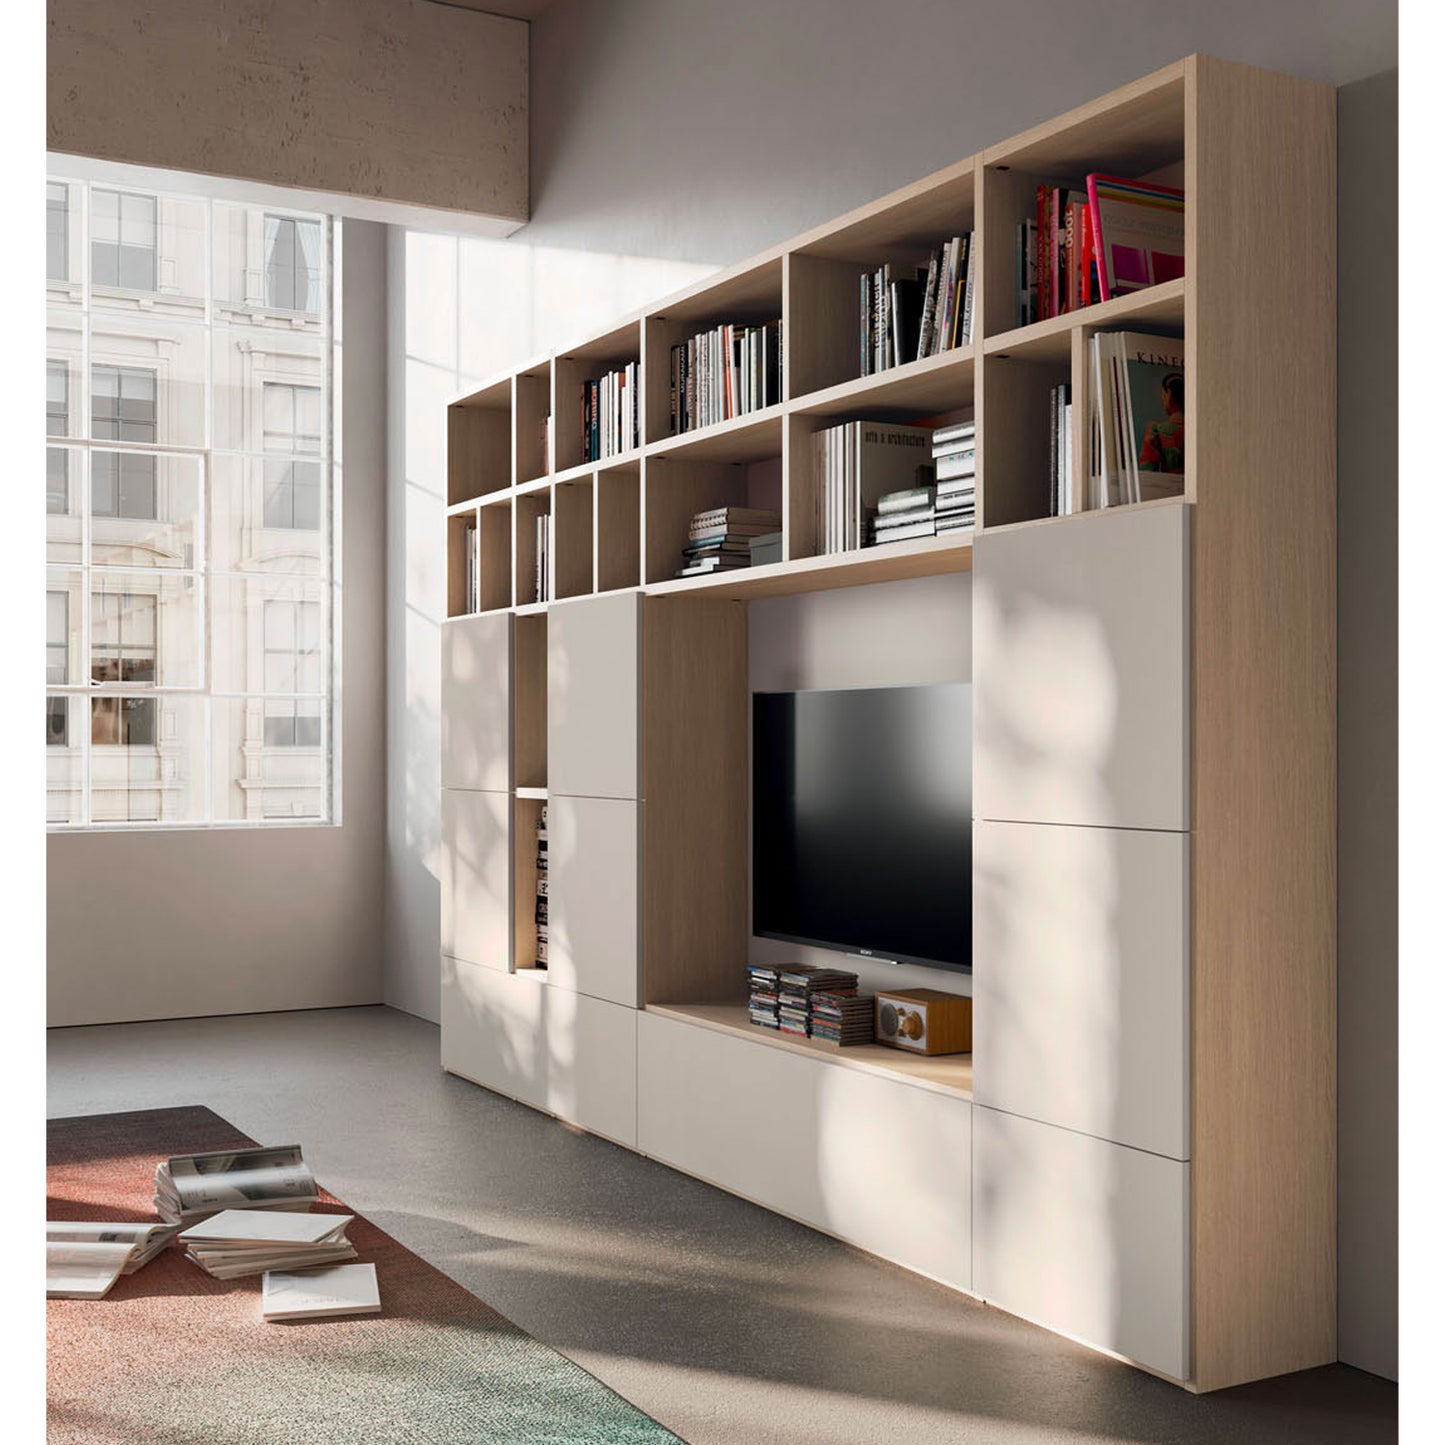 Light Day 26 Bookcase with Media Tv Unit by Orme Design